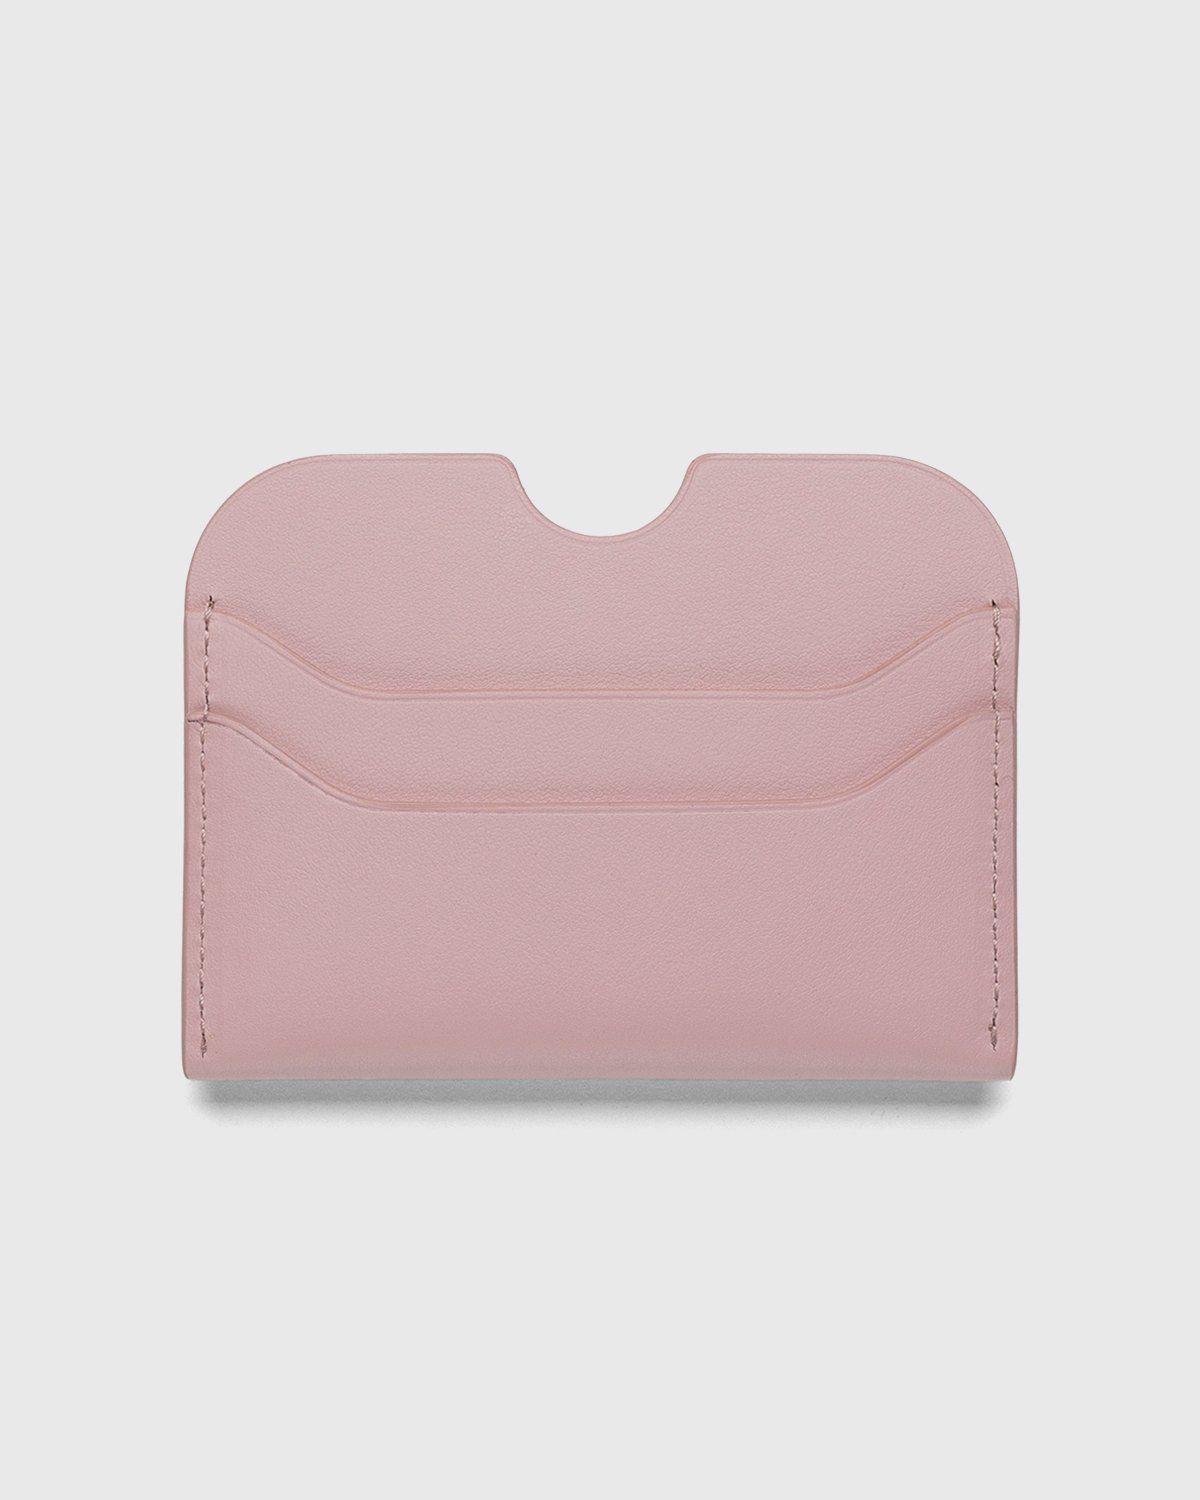 Acne Studios – Leather Card Case Powder Pink - Card Holders - Pink - Image 2